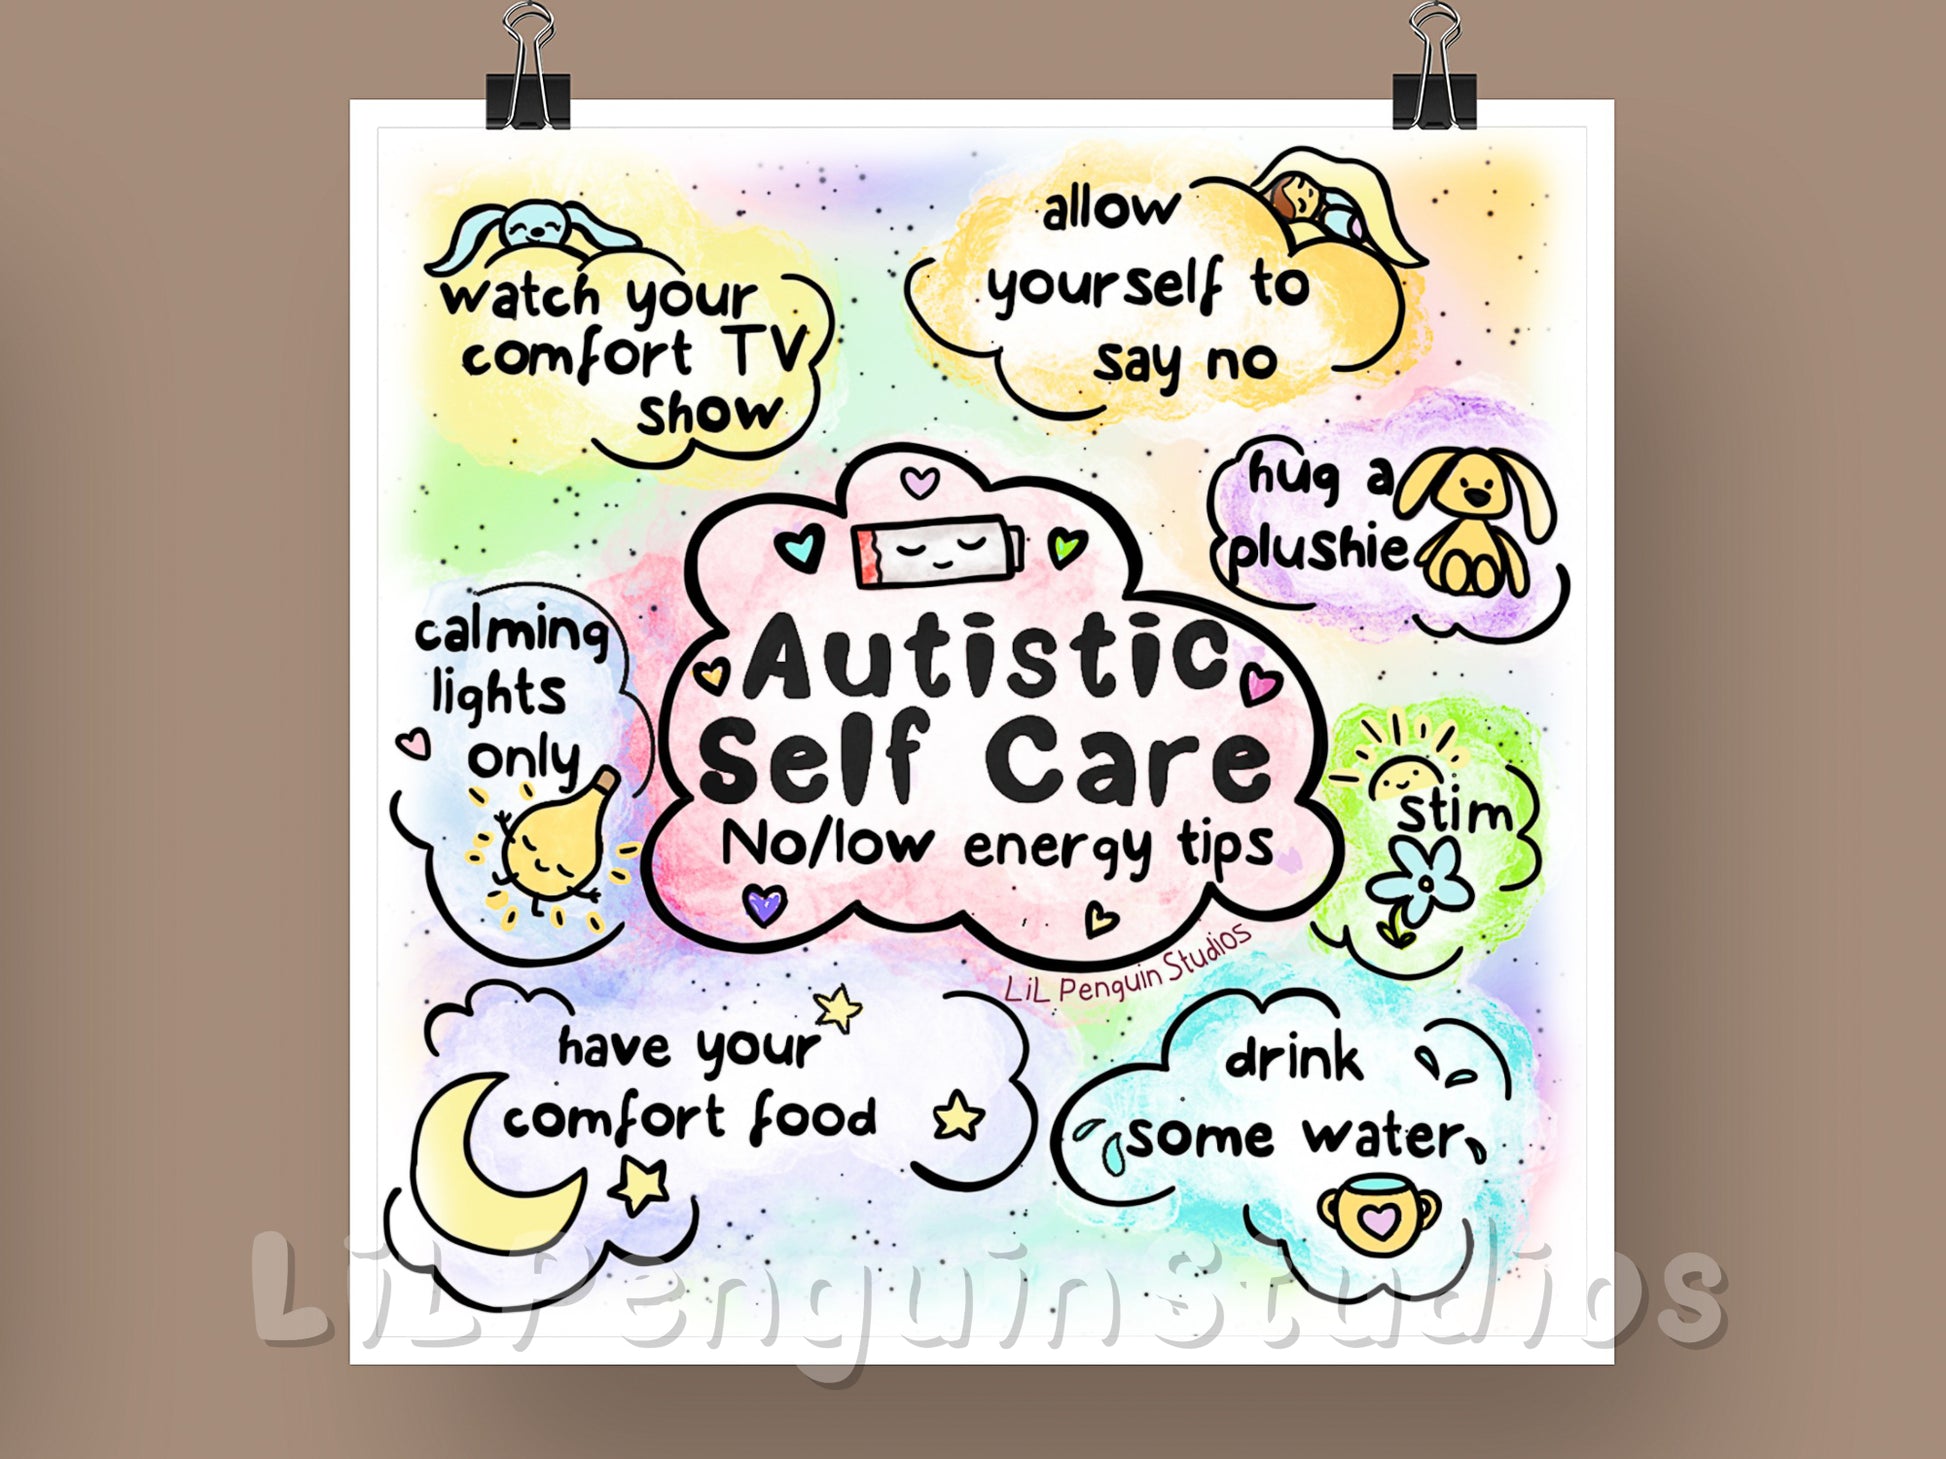 Autism Poster (digital). Transcript: Autistic self care: no/low energy tips. - allow yourself to say no - watch your comfort TV show (or movie, music etc.) - hug a plushie - drink some water - calming lights only - stim - have your comfort food